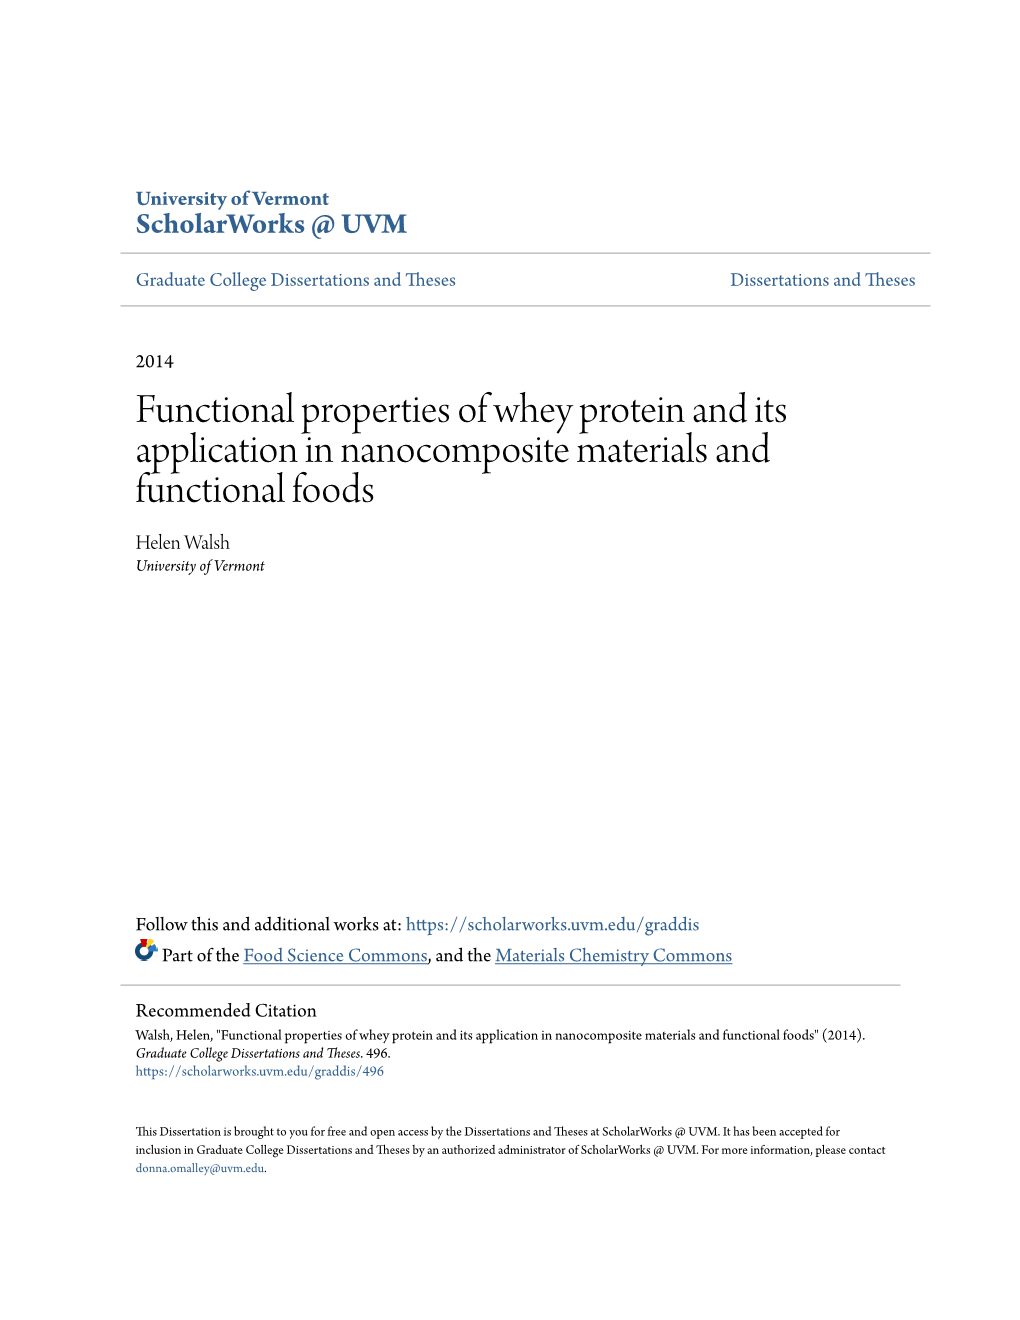 Functional Properties of Whey Protein and Its Application in Nanocomposite Materials and Functional Foods Helen Walsh University of Vermont